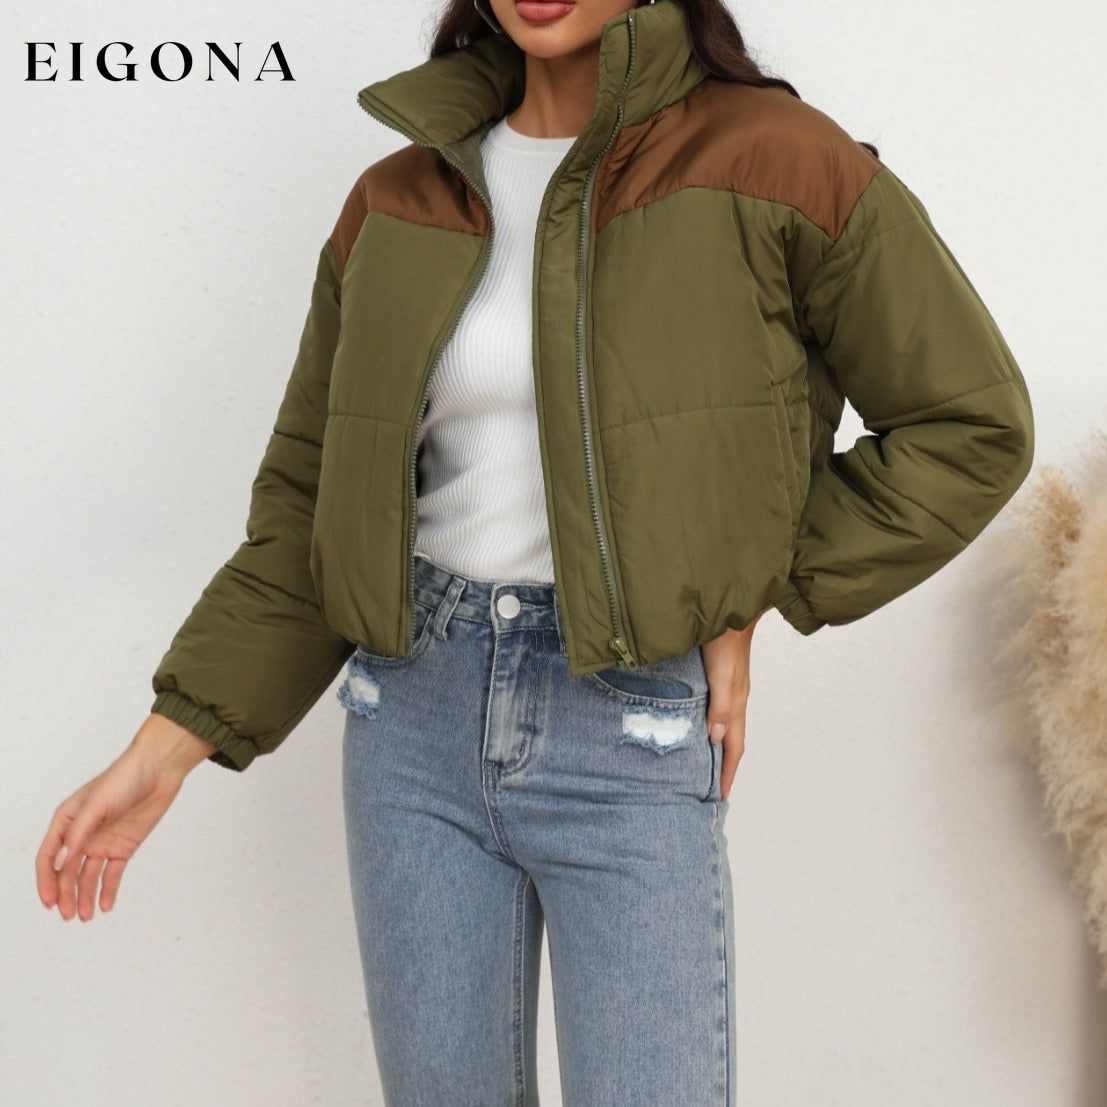 Two-Tone Zip-Up Puffer Jacket CATHSNNA clothes Jacket Coat Jackets & Coats Ship From Overseas Shipping Delay 09/29/2023 - 10/03/2023